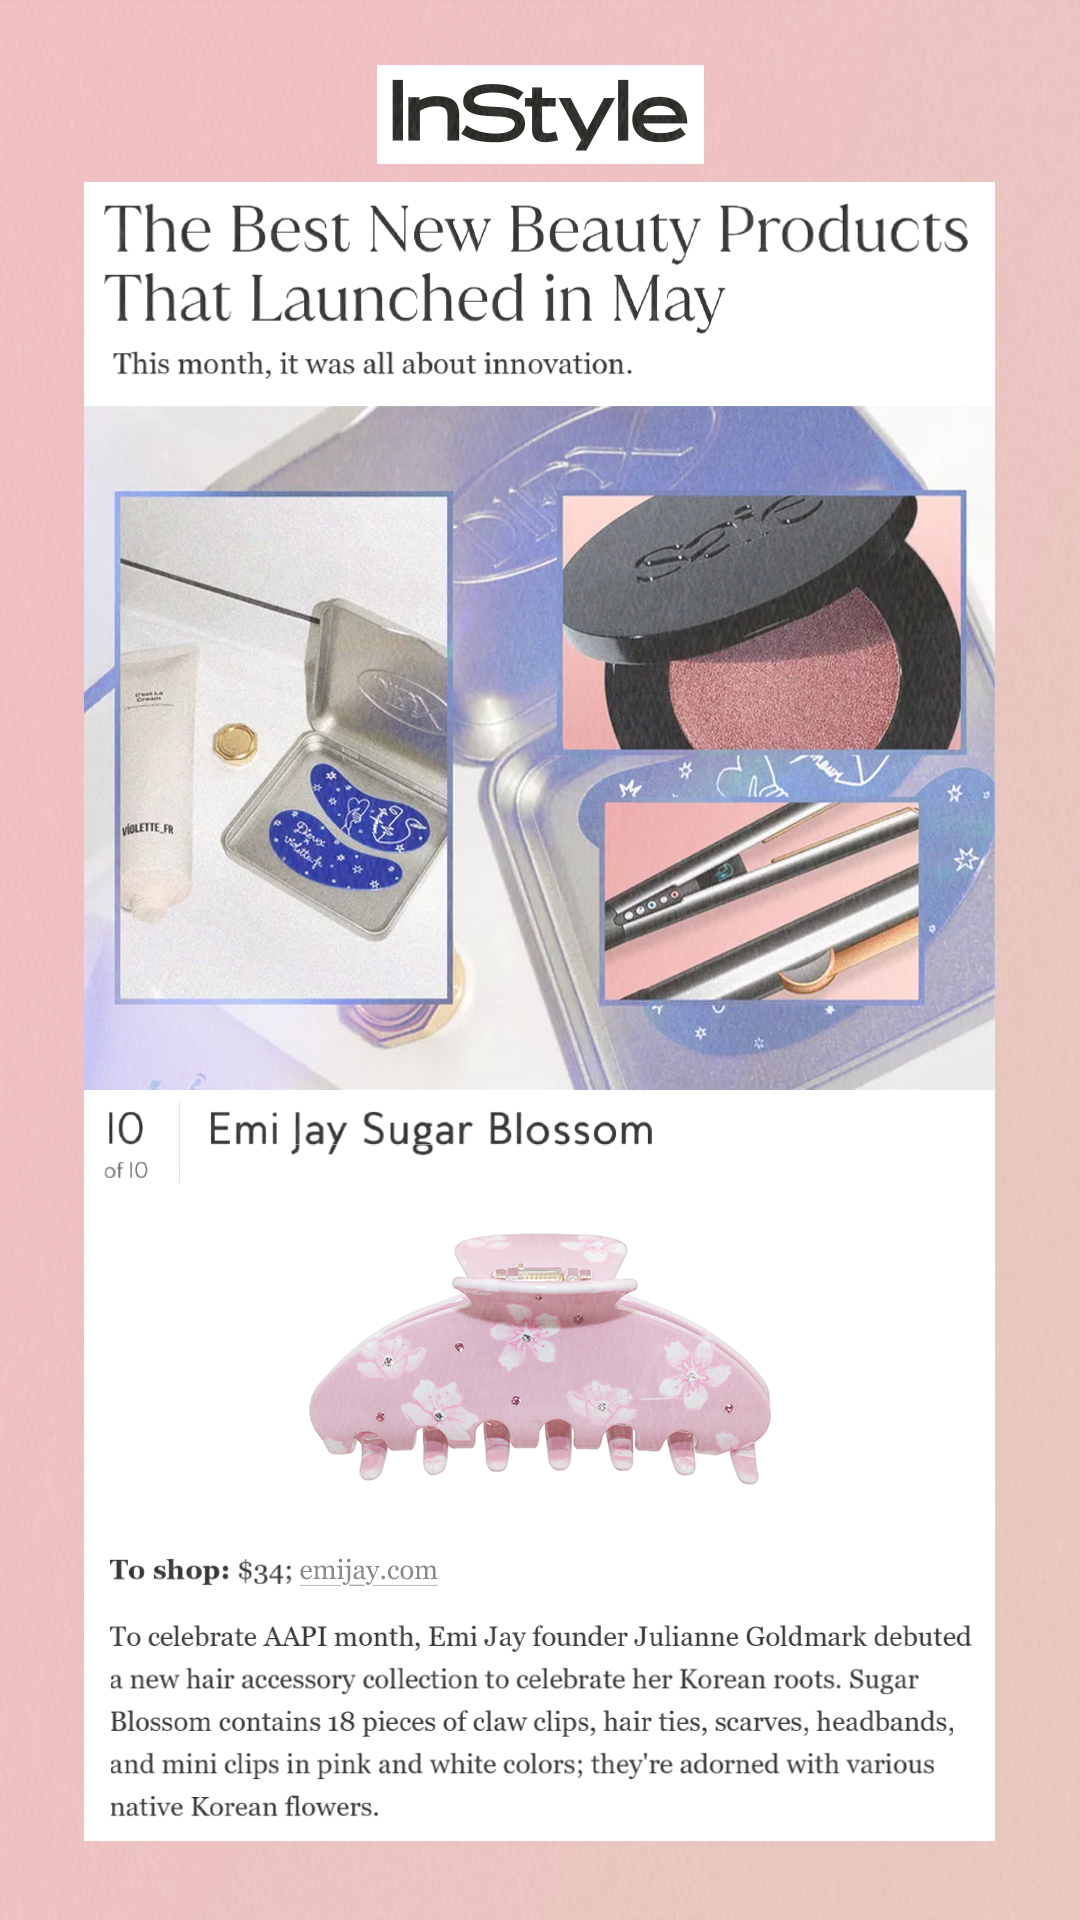 The Best New Beauty Products That Launched in May This month, it was all about innovation. 10 of 10 Emi Jay Sugar Blossom  To shop: $34; emijay.com To celebrate AAPI month, Emi Jay founder Julianne Goldmark debuted a new hair accessory collection to celebrate her Korean roots. Sugar Blossom contains 18 pieces of claw clips, hair ties, scarves, headbands, and mini clips in pink and white colors; they're adorned with various native Korean flowers.